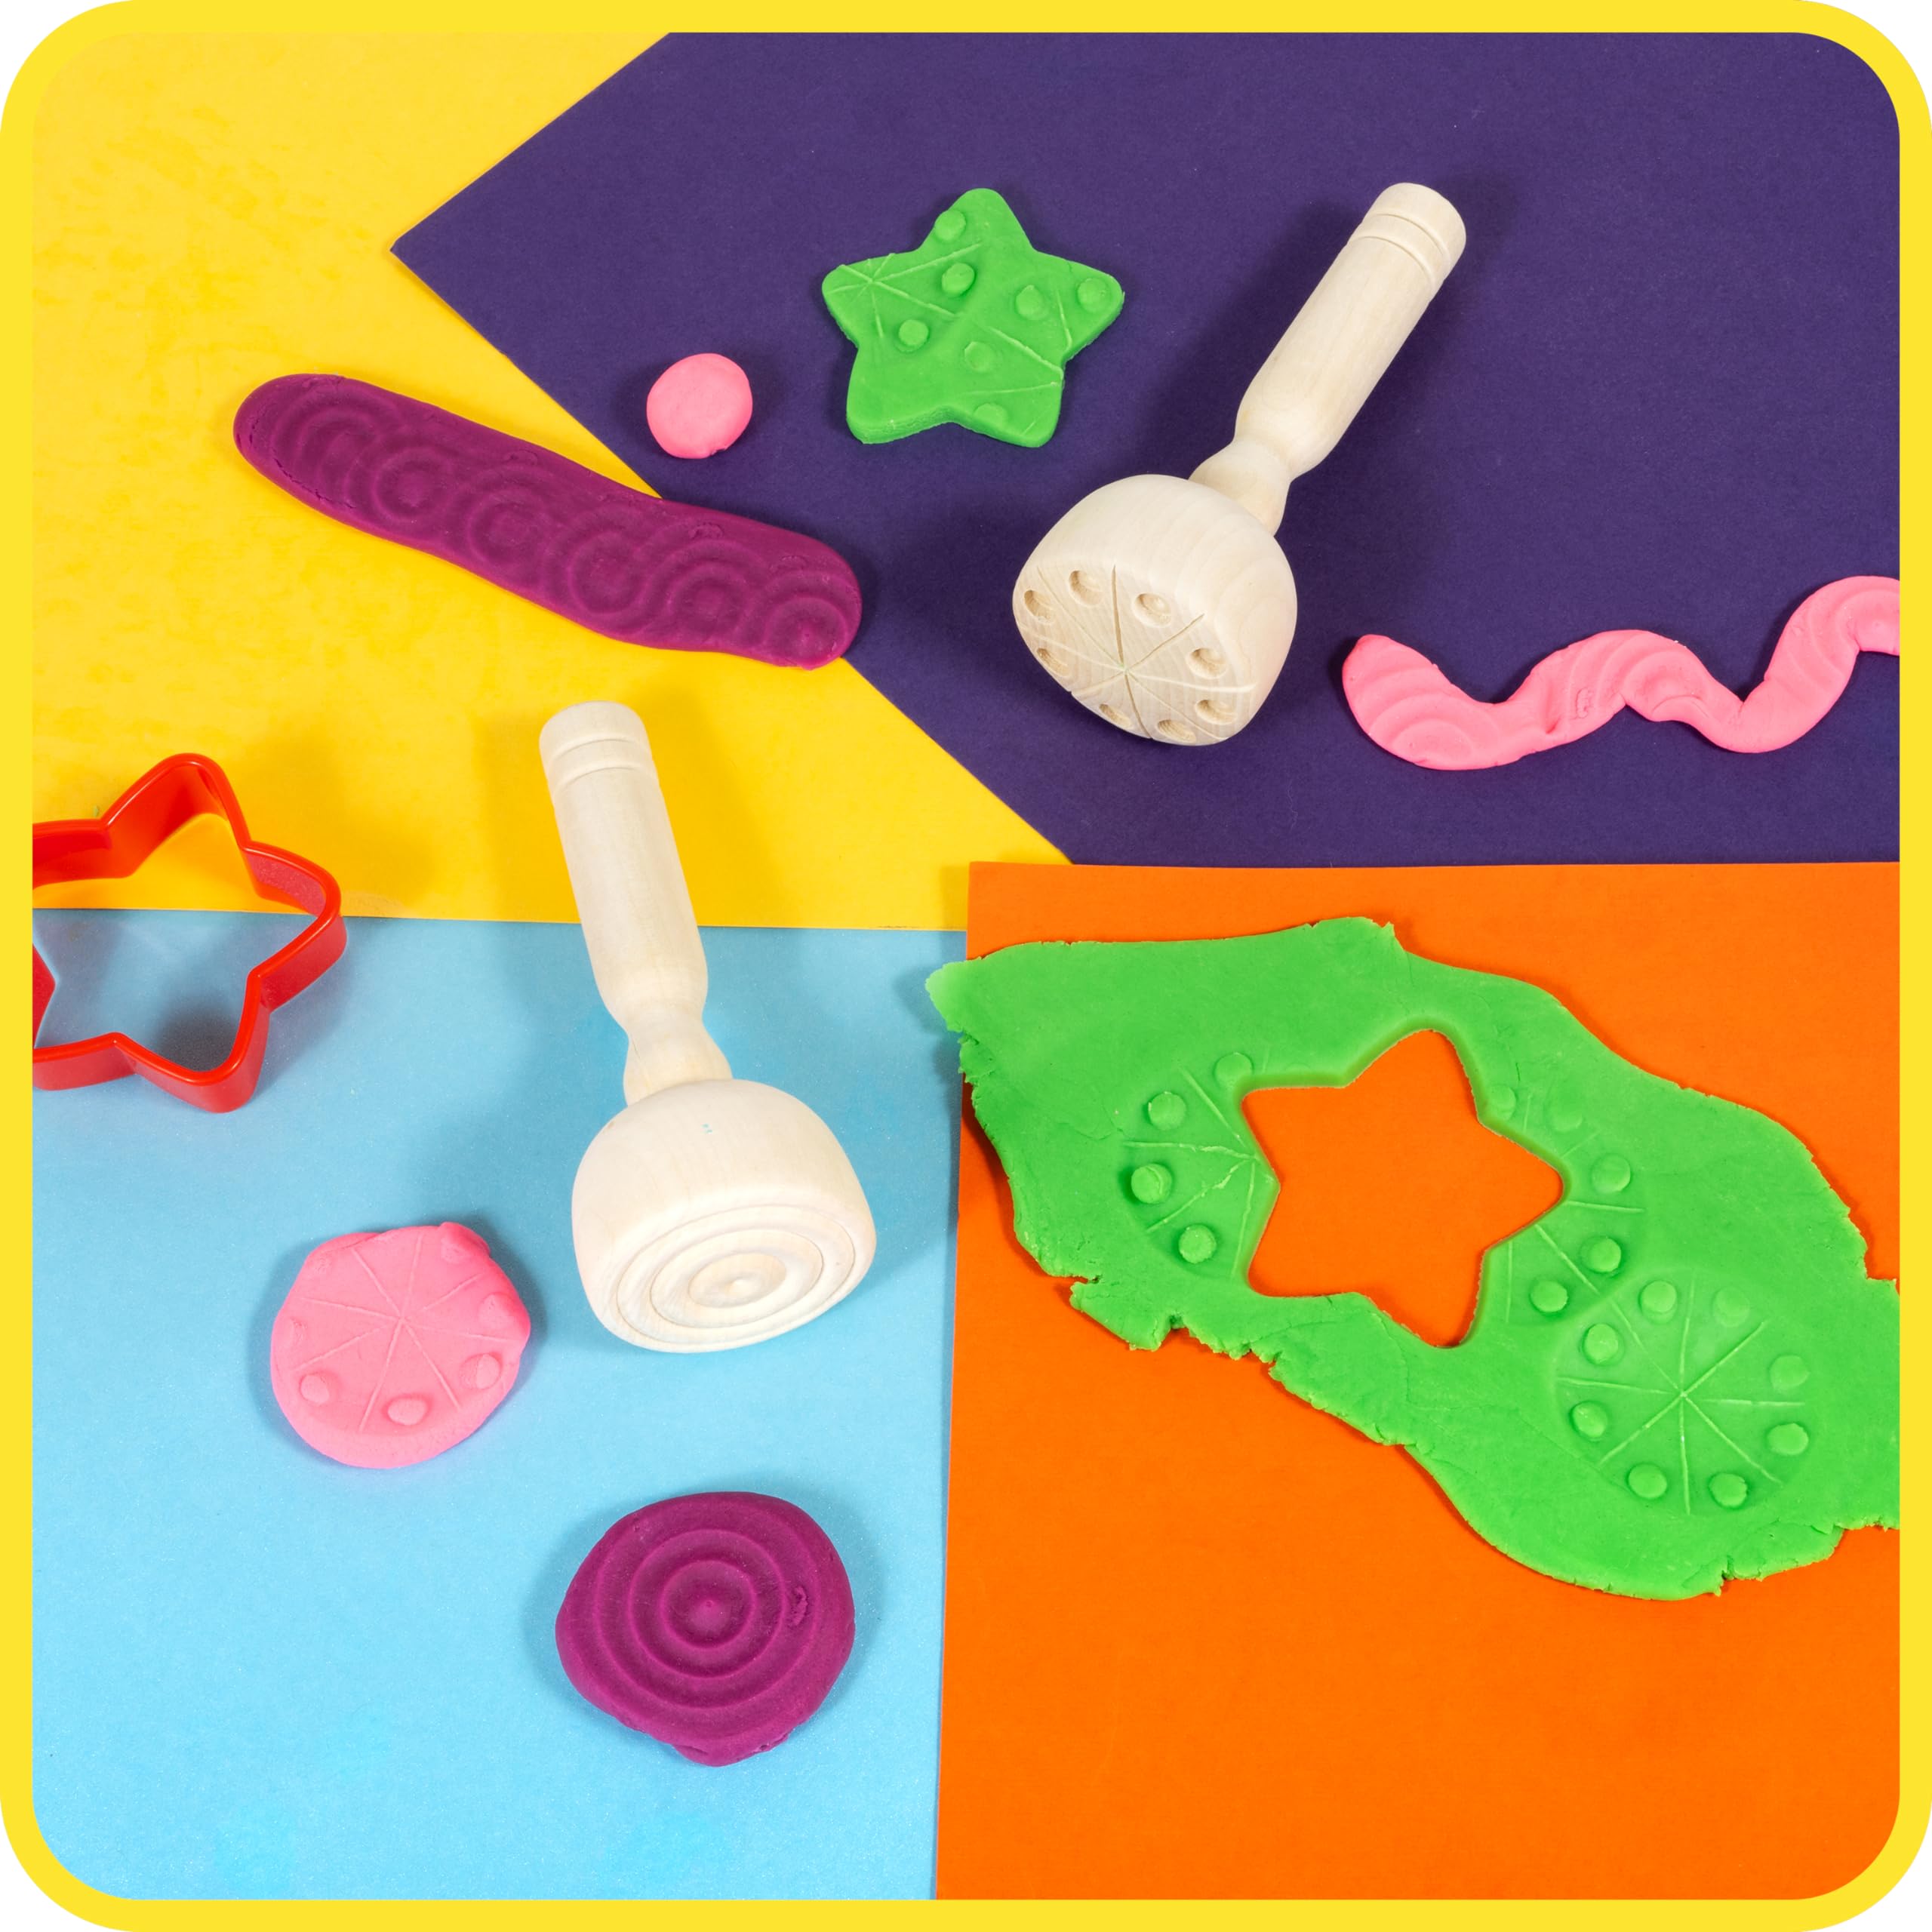 READY 2 LEARN Wooden Dough Stampers - Set of 4 - Kids Playdough, Clay, Pottery Texture Tools